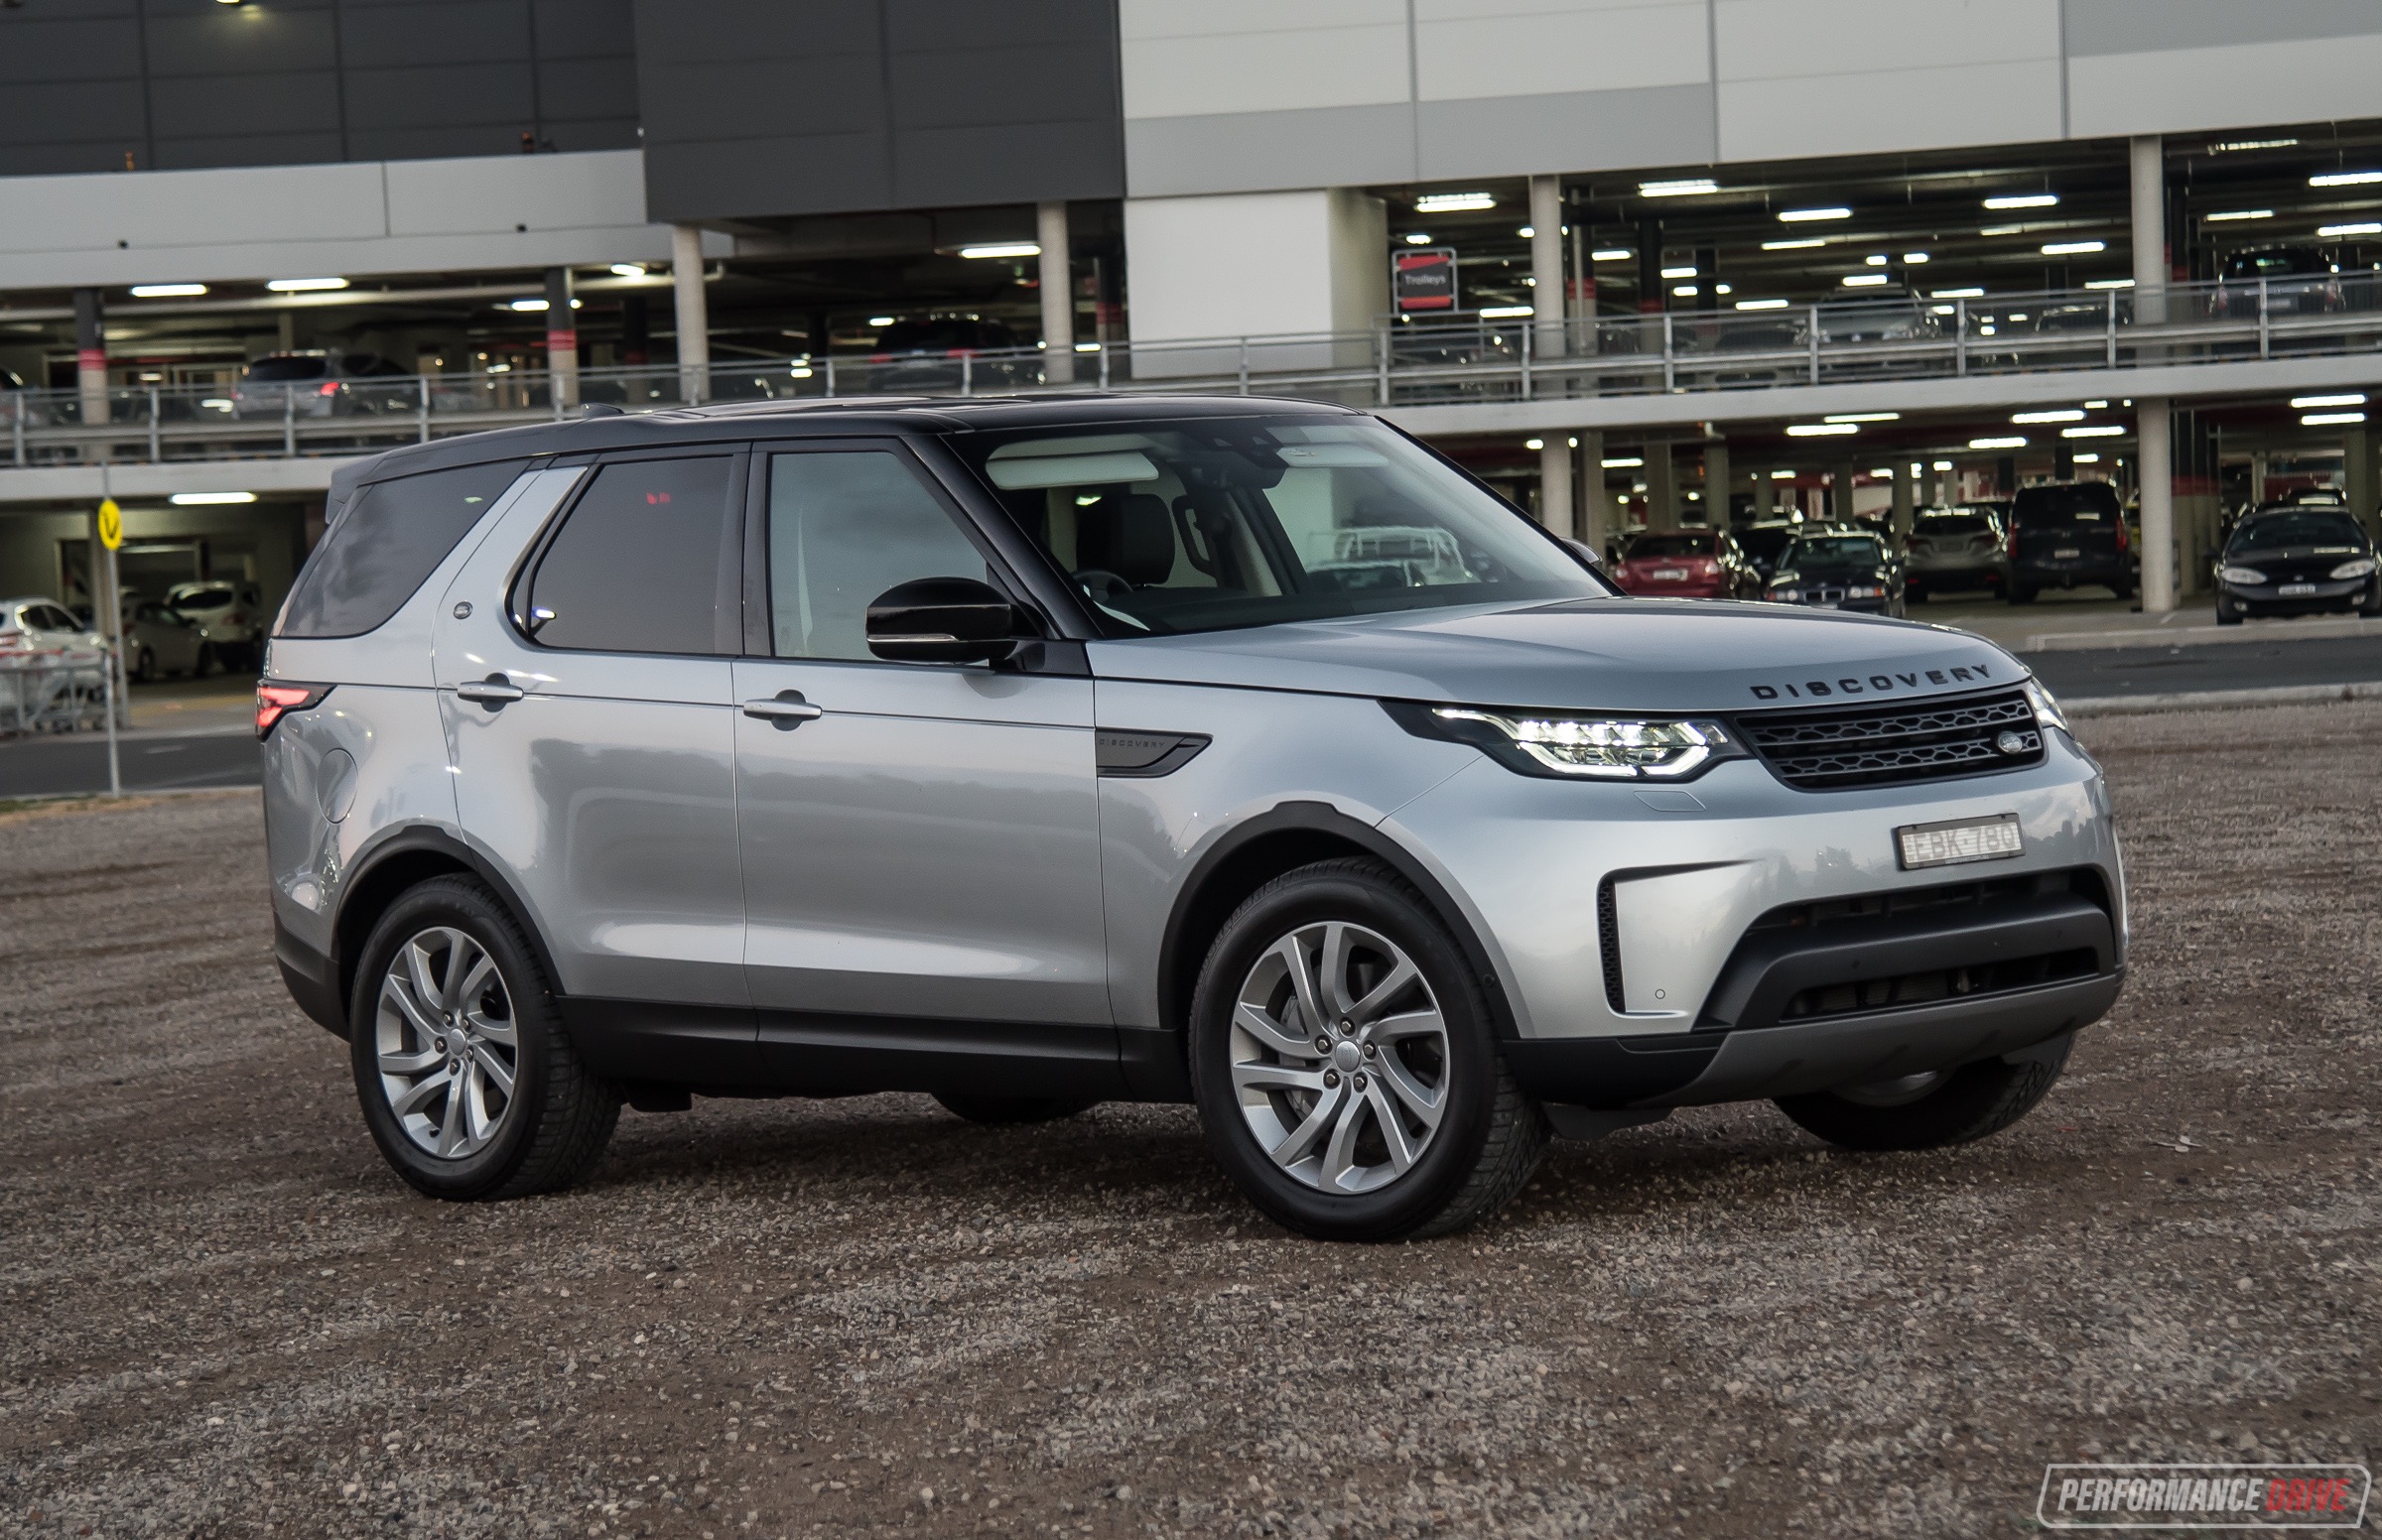 2019 Land Rover Discovery Sd6 SE review (video)